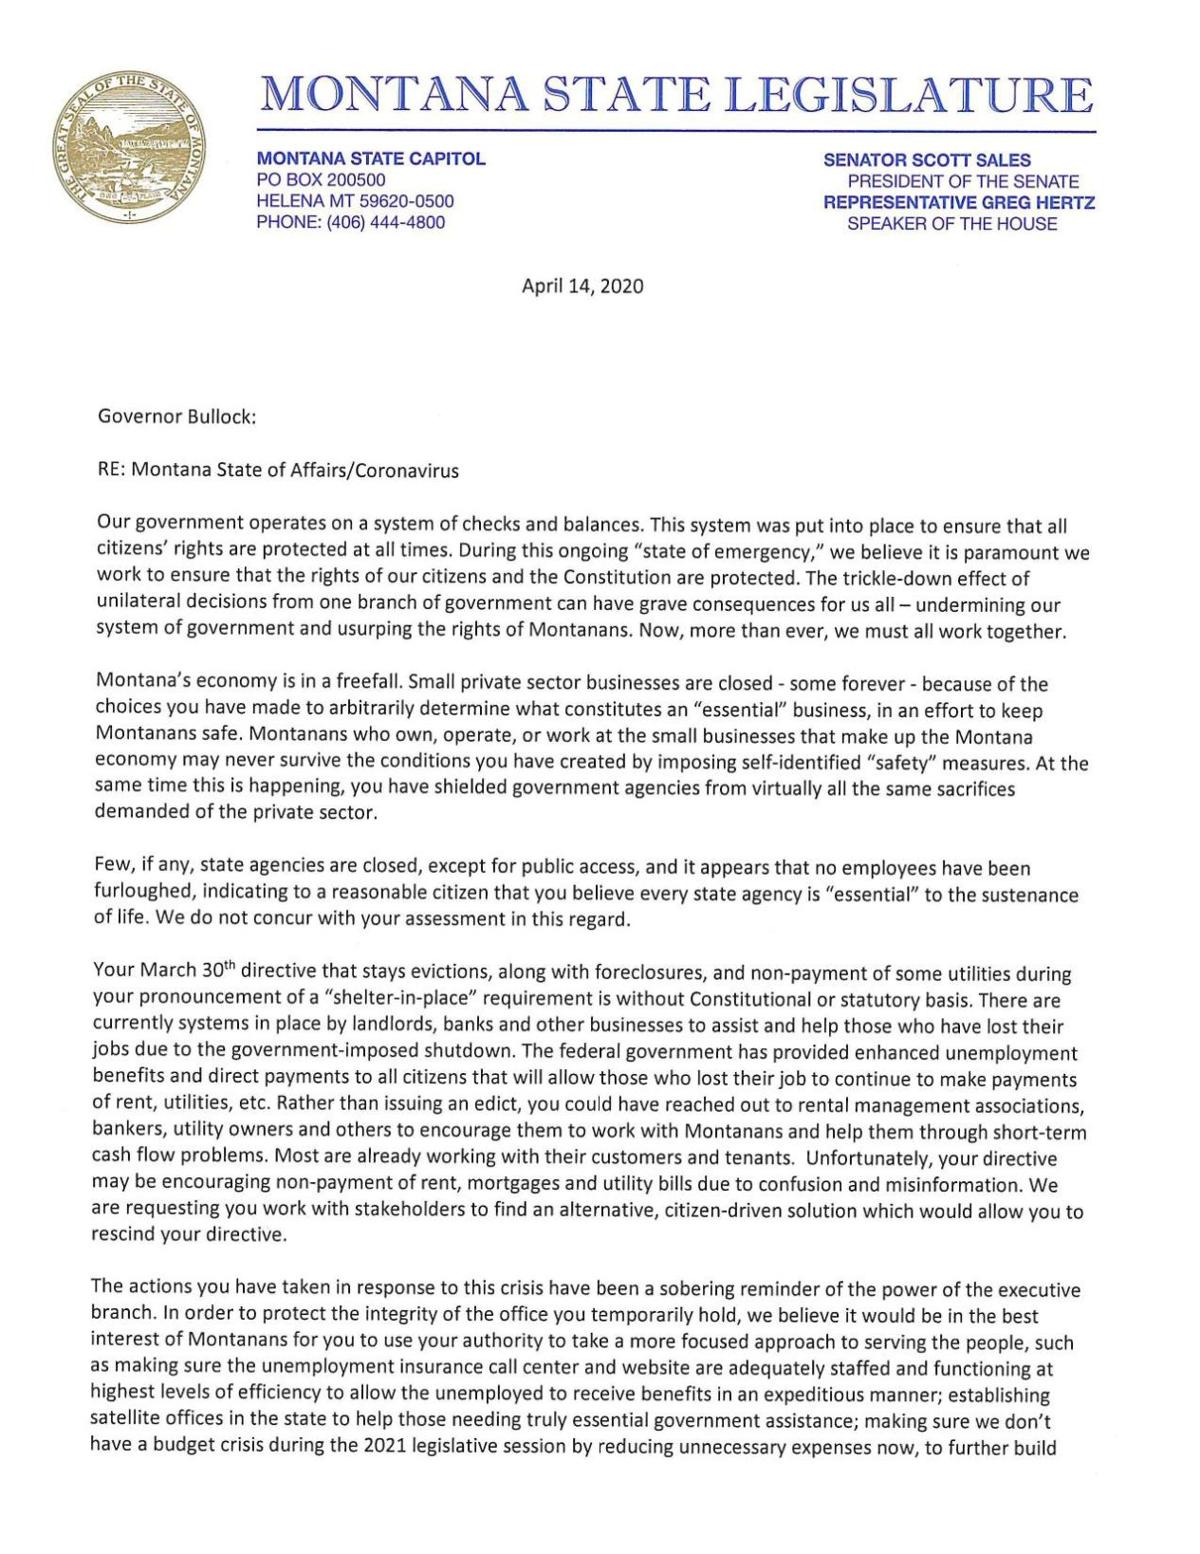 MT congress members write letter to gov. voicing COVID-19